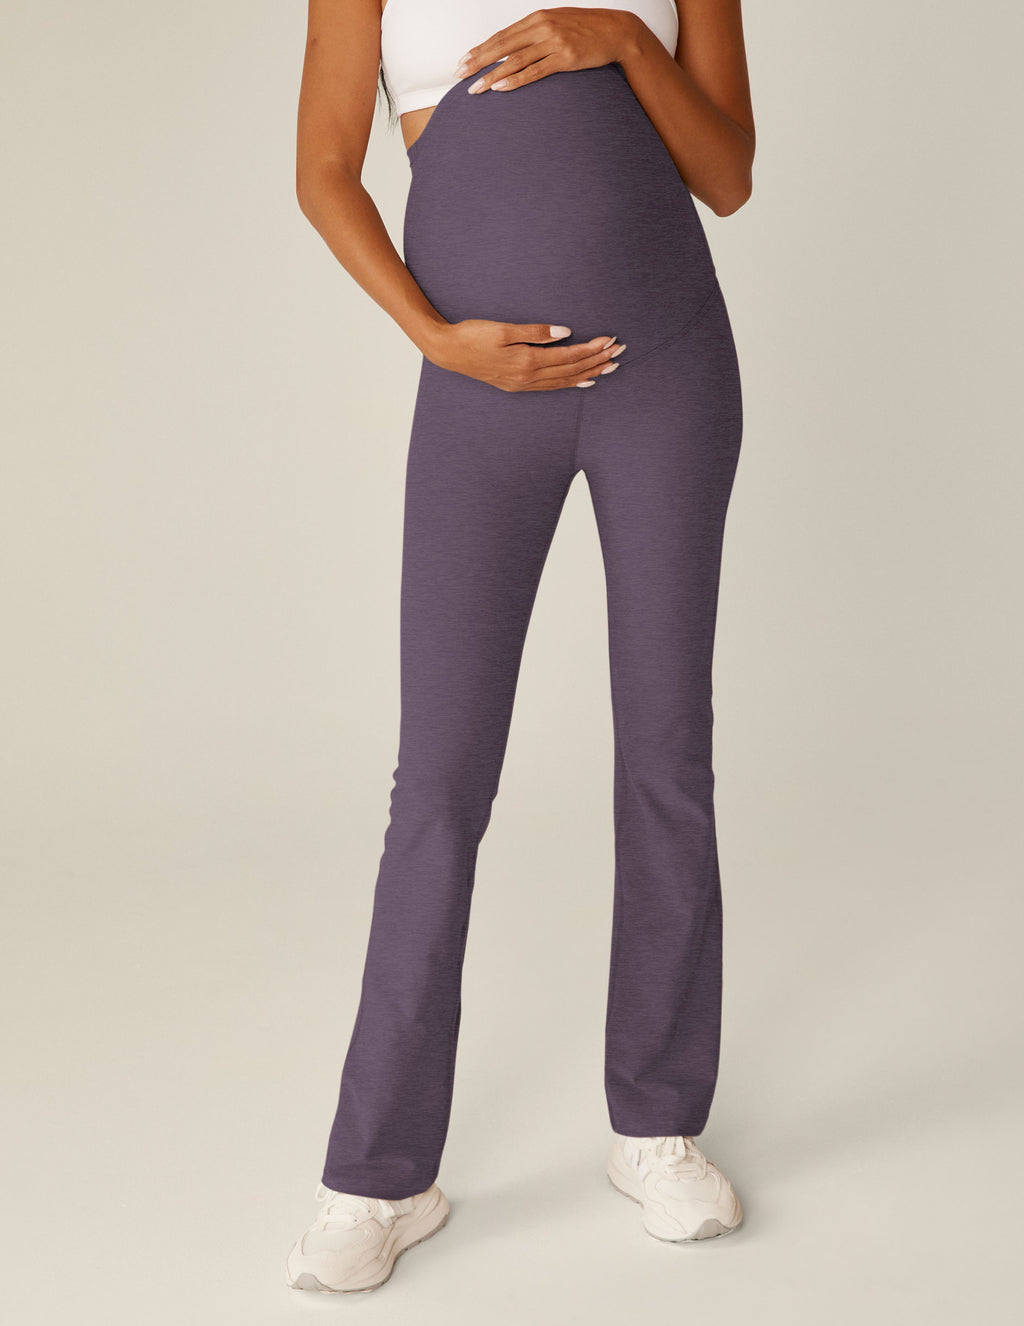 Spacedye Practice Maternity Pant Secondary Image